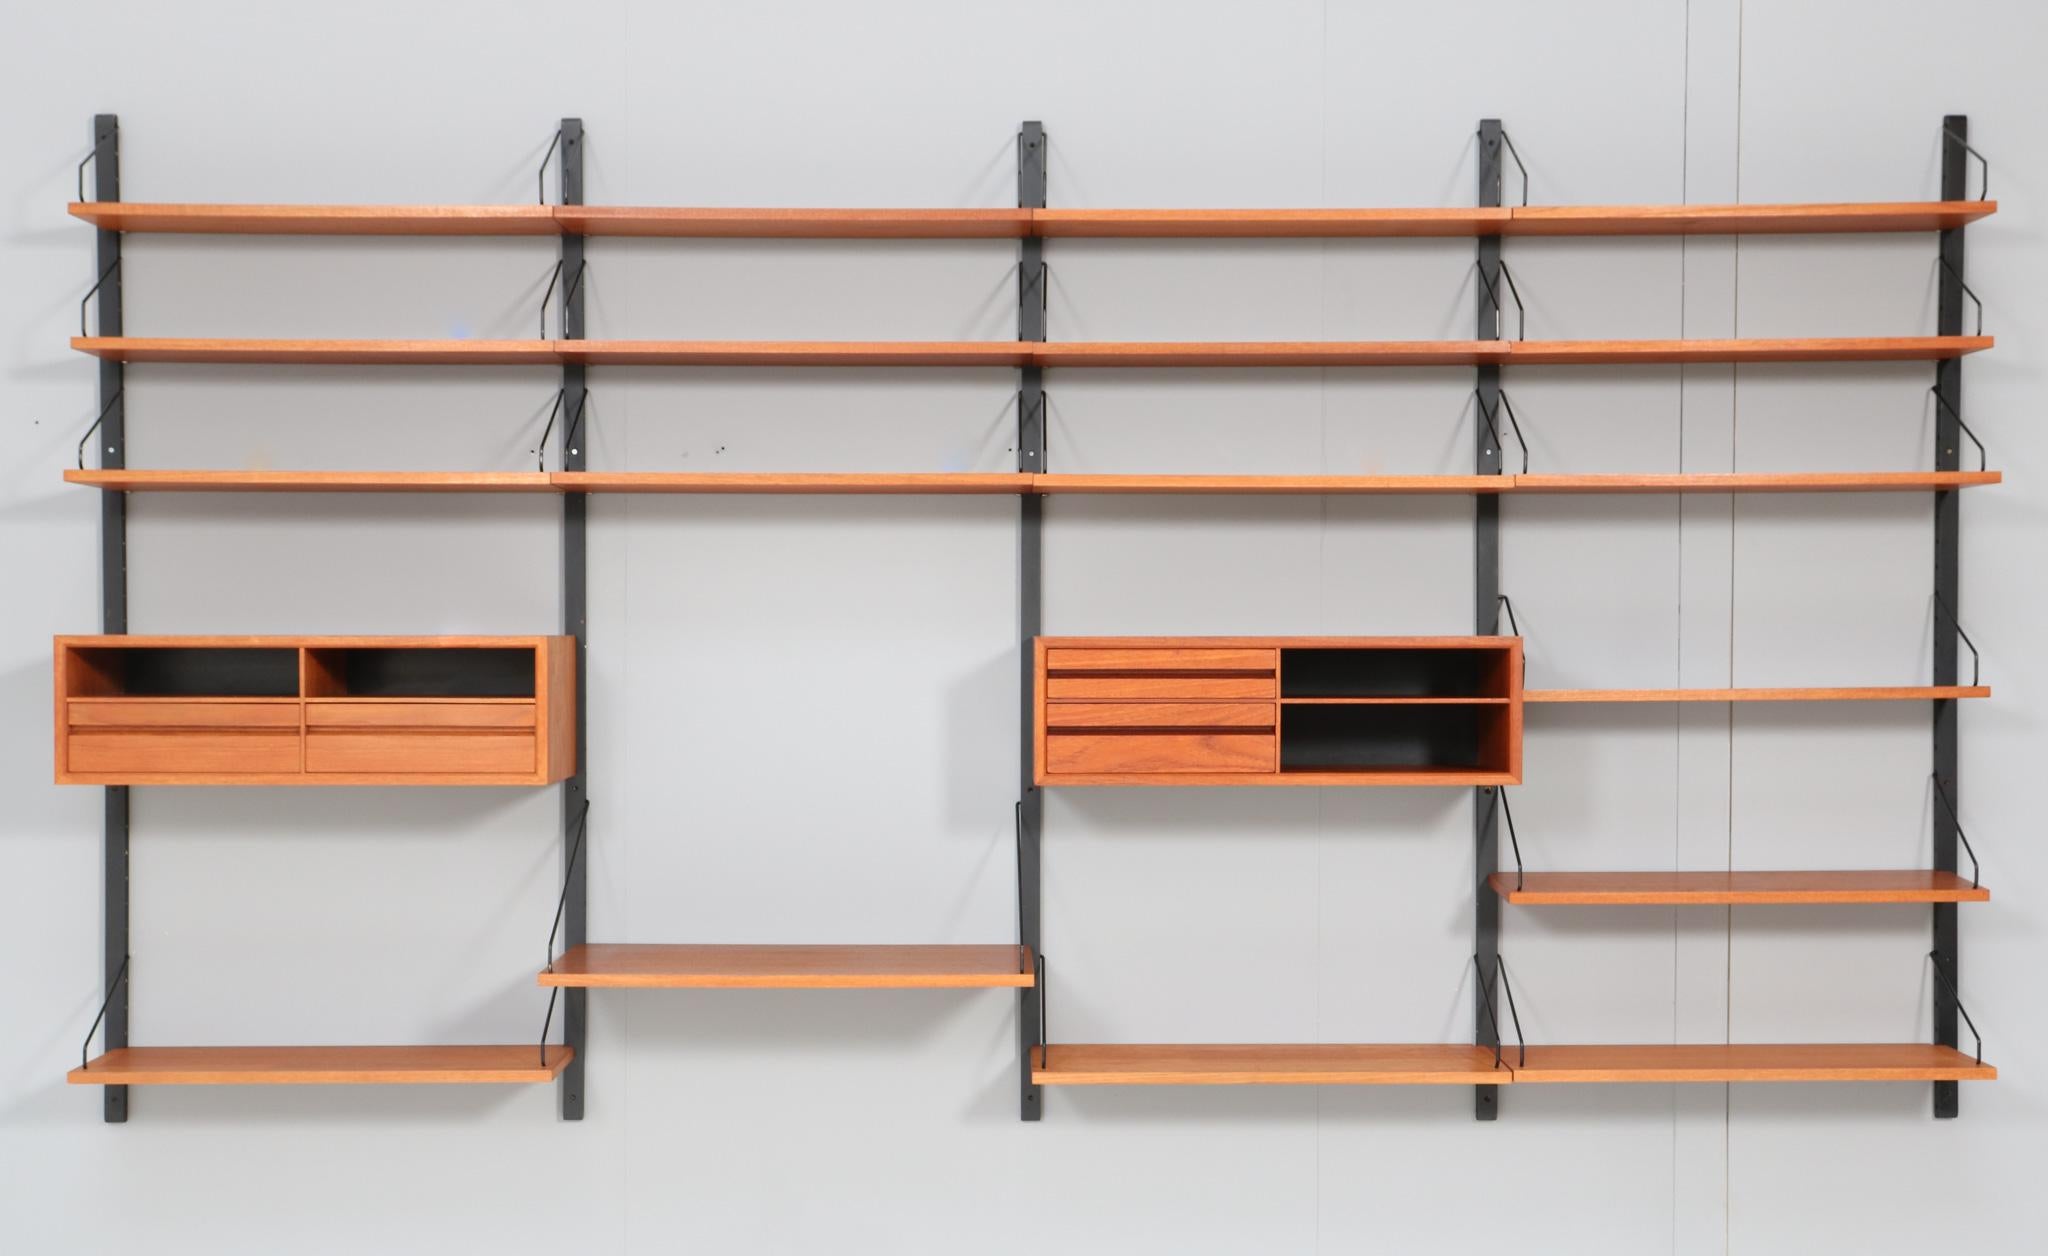 Funky and elegant Mid-Century Modern Royal modular wall unit.
Design by Poul Cadovius for Cado.
Striking Danish design from the 1960s.
This large teak Mid-Century Modern Royal modular wall unit by Poul Cadovius for Cado consists of:
Five black